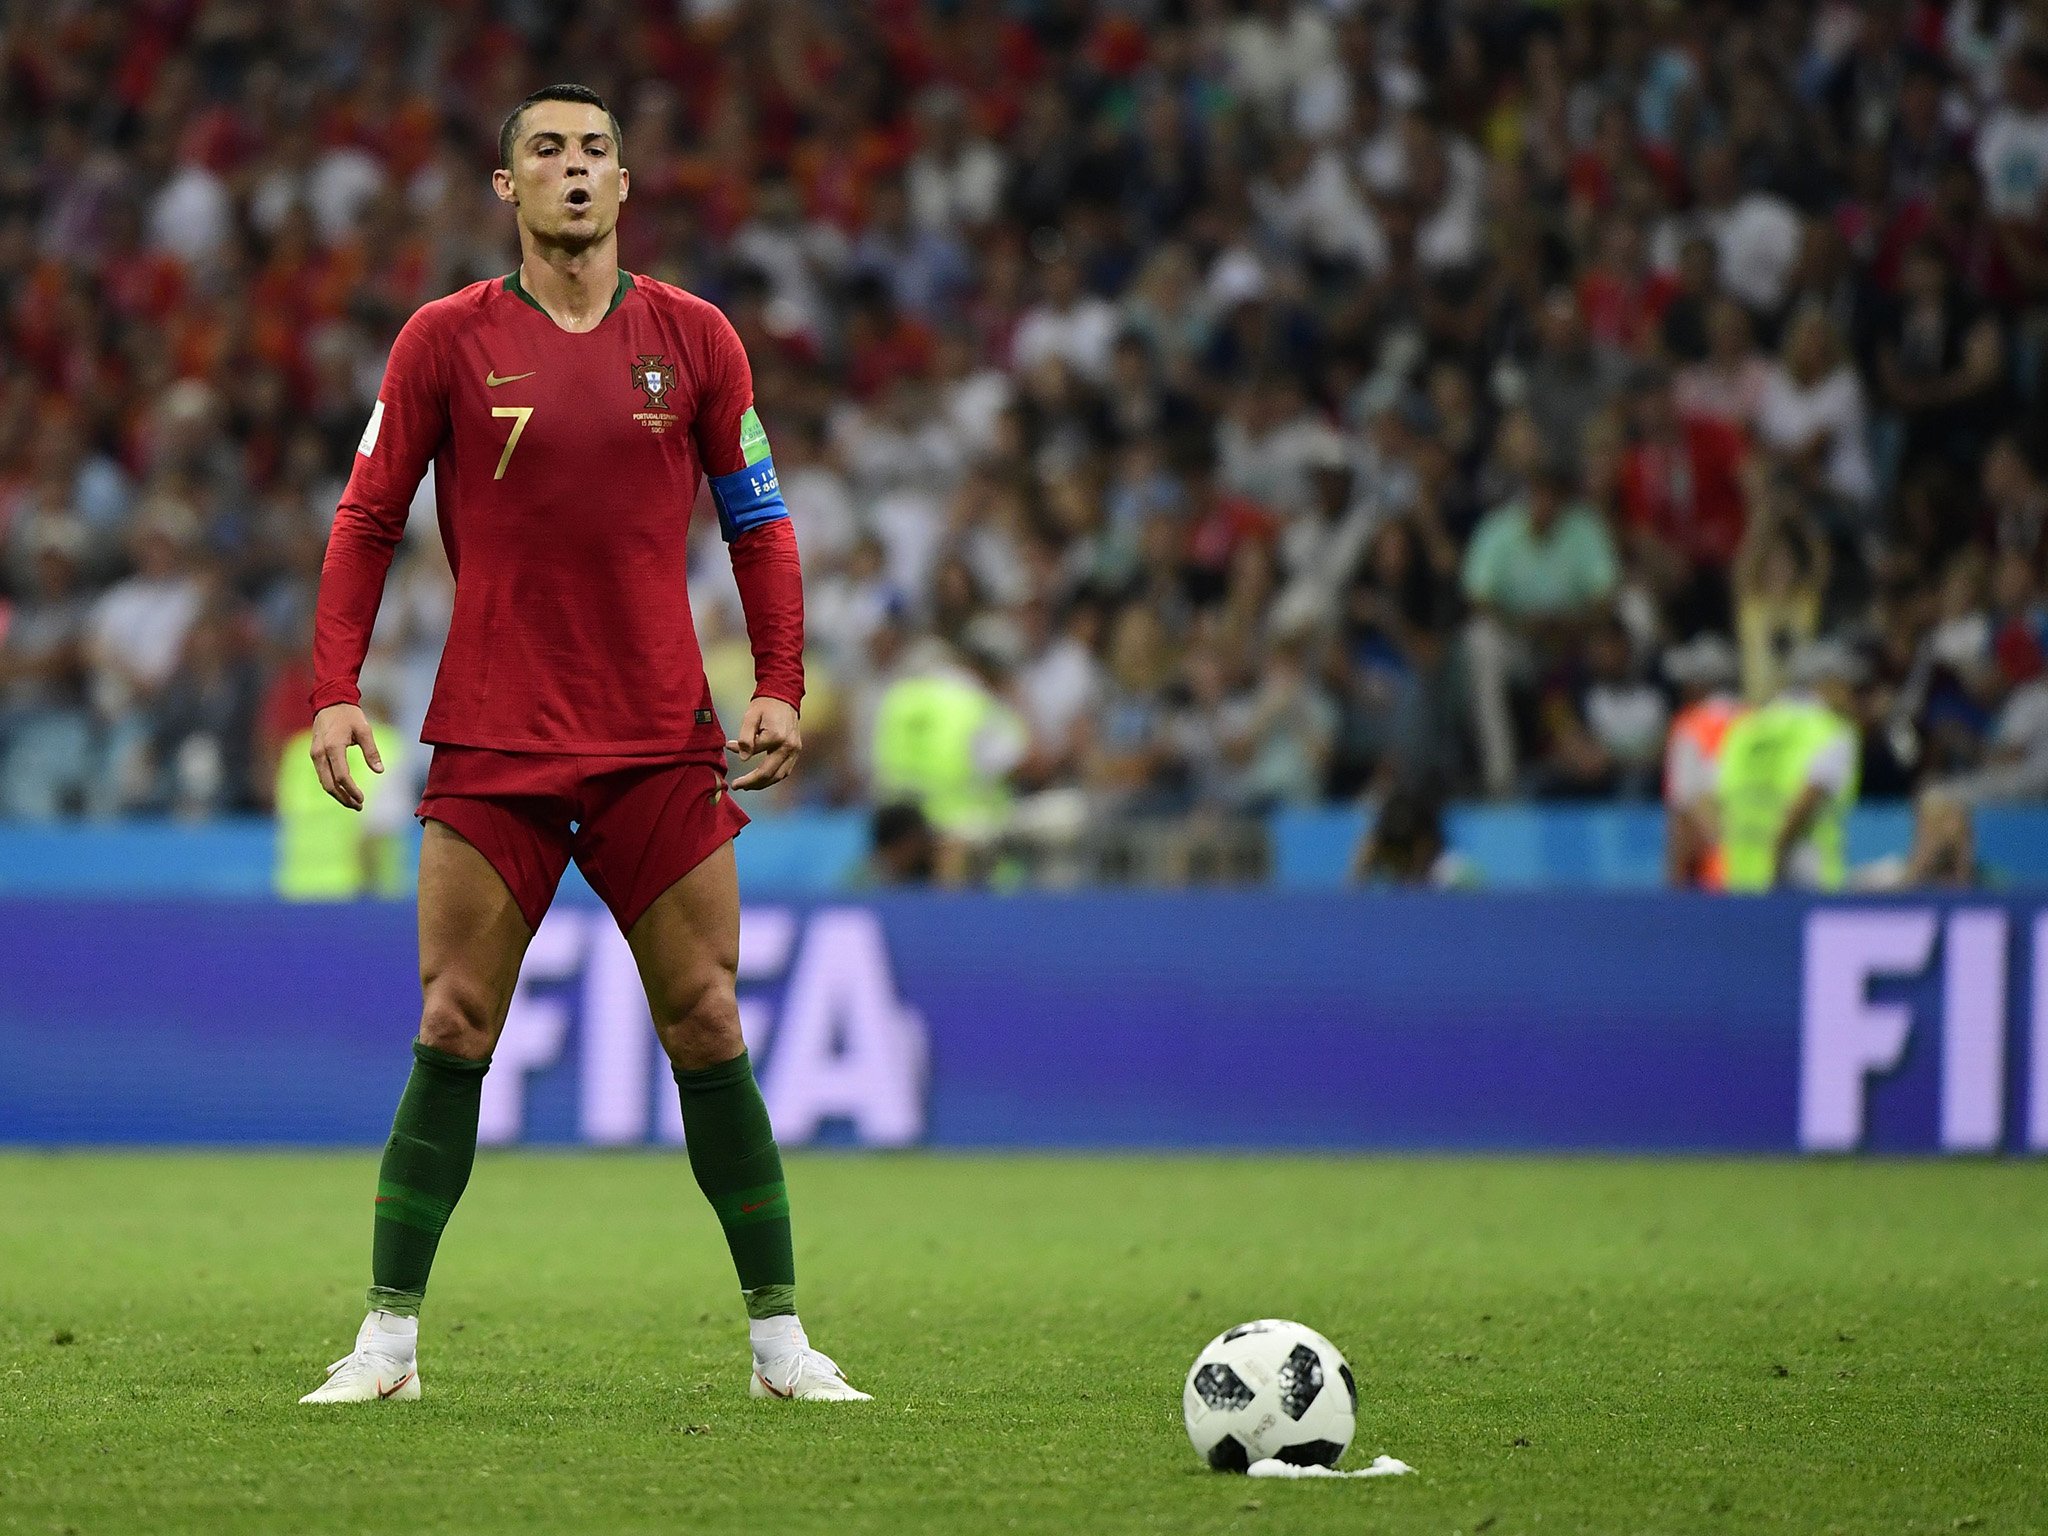 14006762-soccer-player-standing-with-a-ball-player-in-full-image.jpg